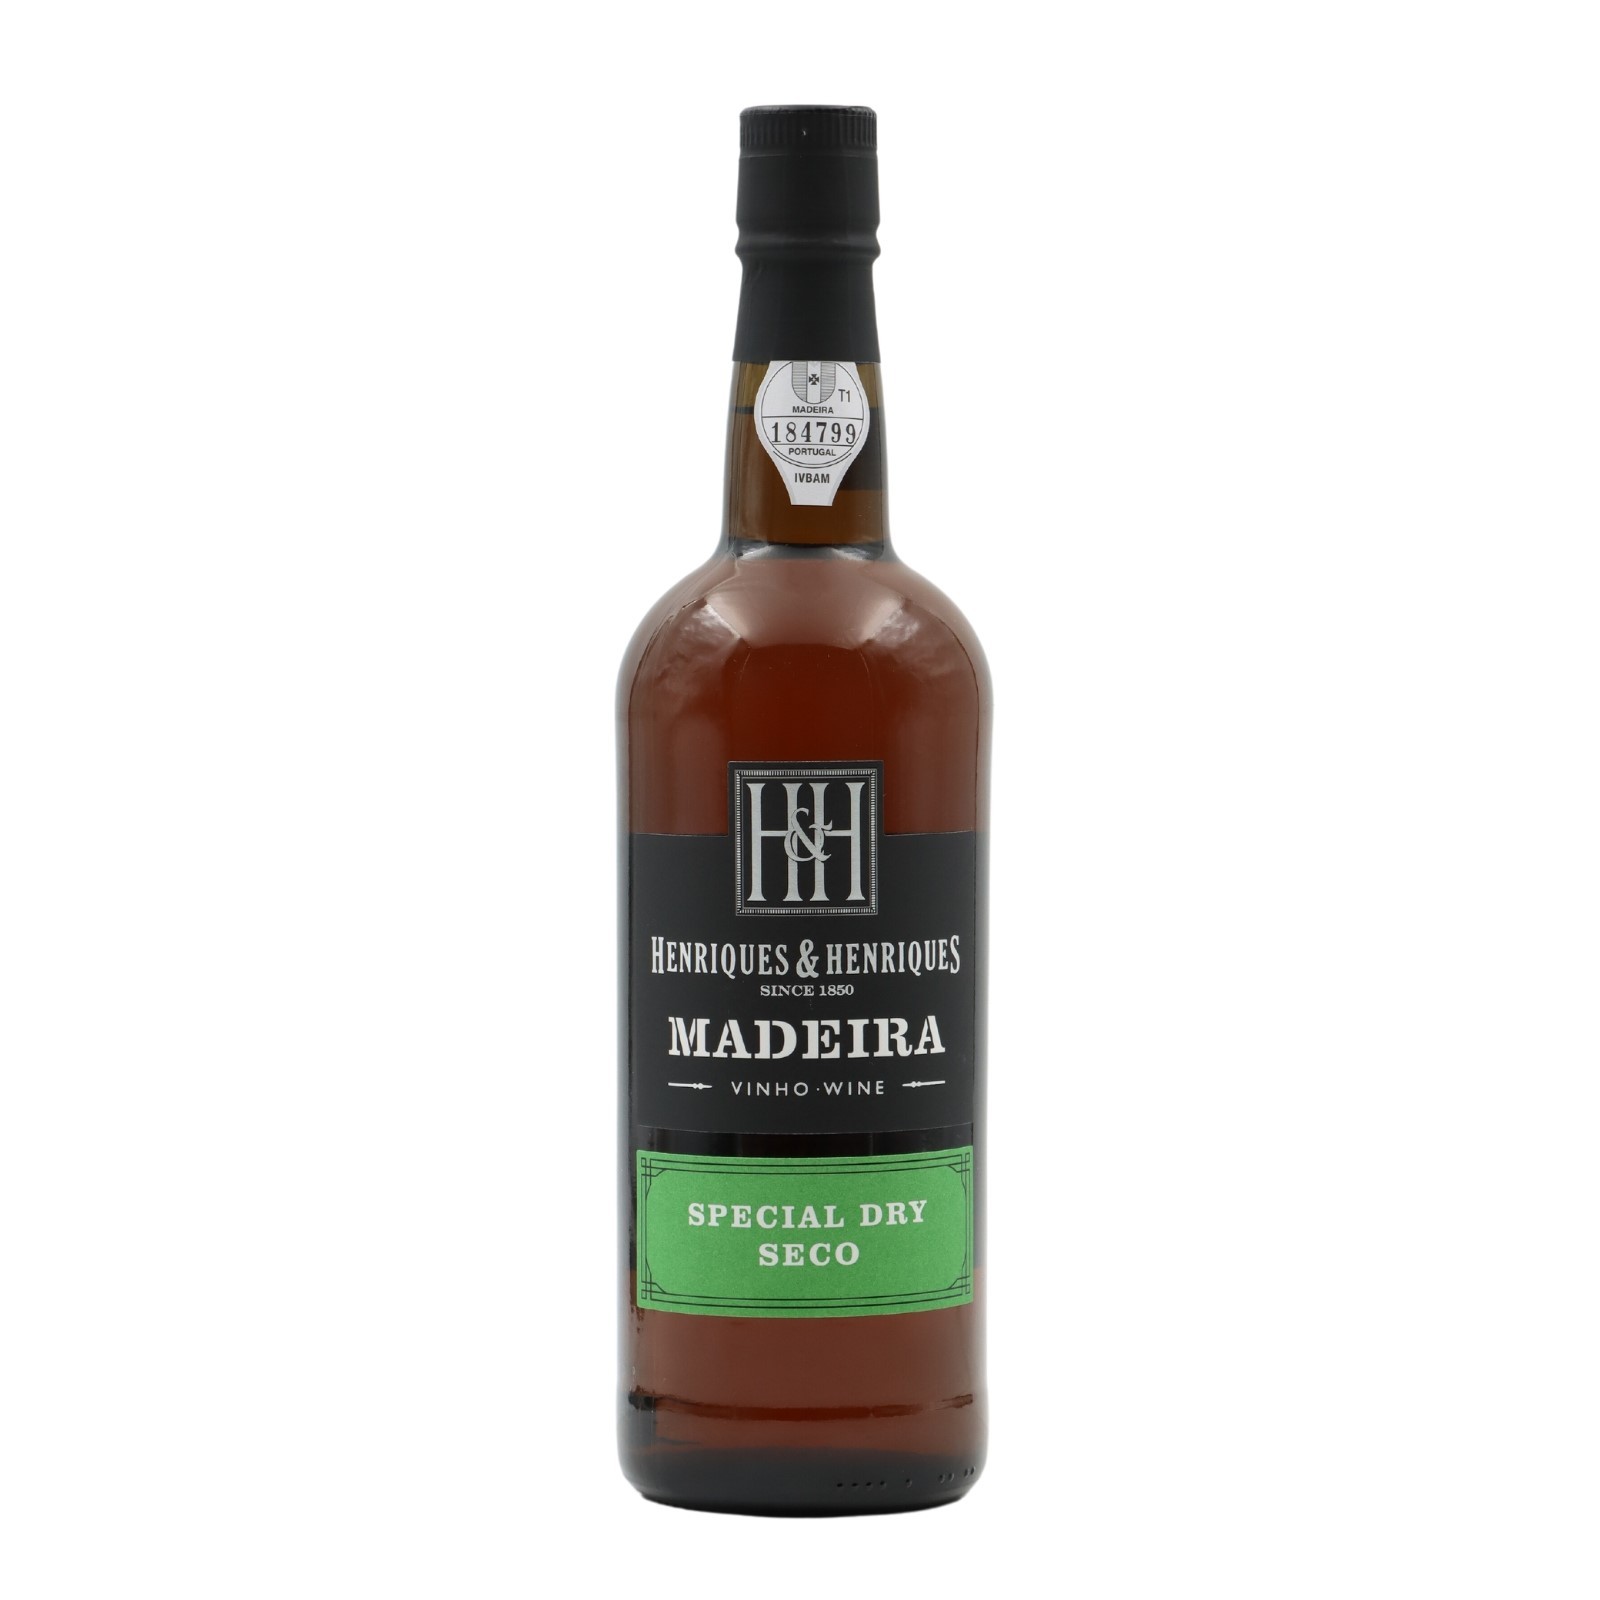 Henriques Henriques Special Dry 3 years Madeira